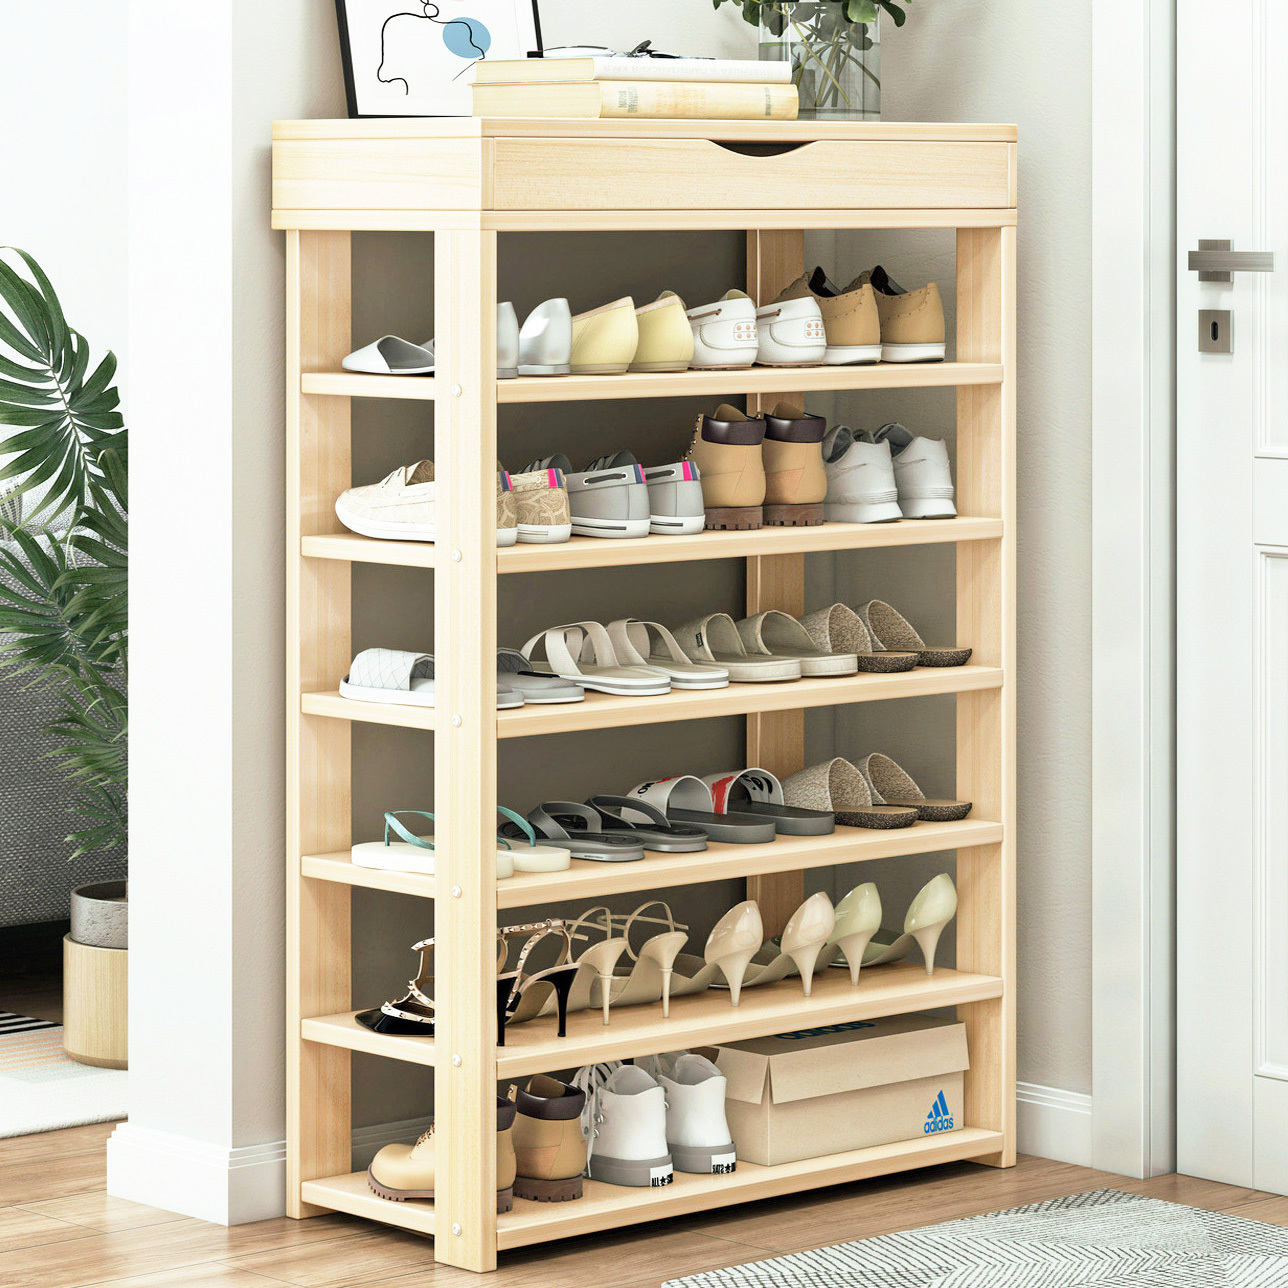 Relaxdays Rack 3 Levels, 9 Pairs, Shoes Storage for Hallway Made of Iron,  HxWxD: 50 x 70 x 26 cm, Stable, White, 100% : Amazon.co.uk: Home & Kitchen